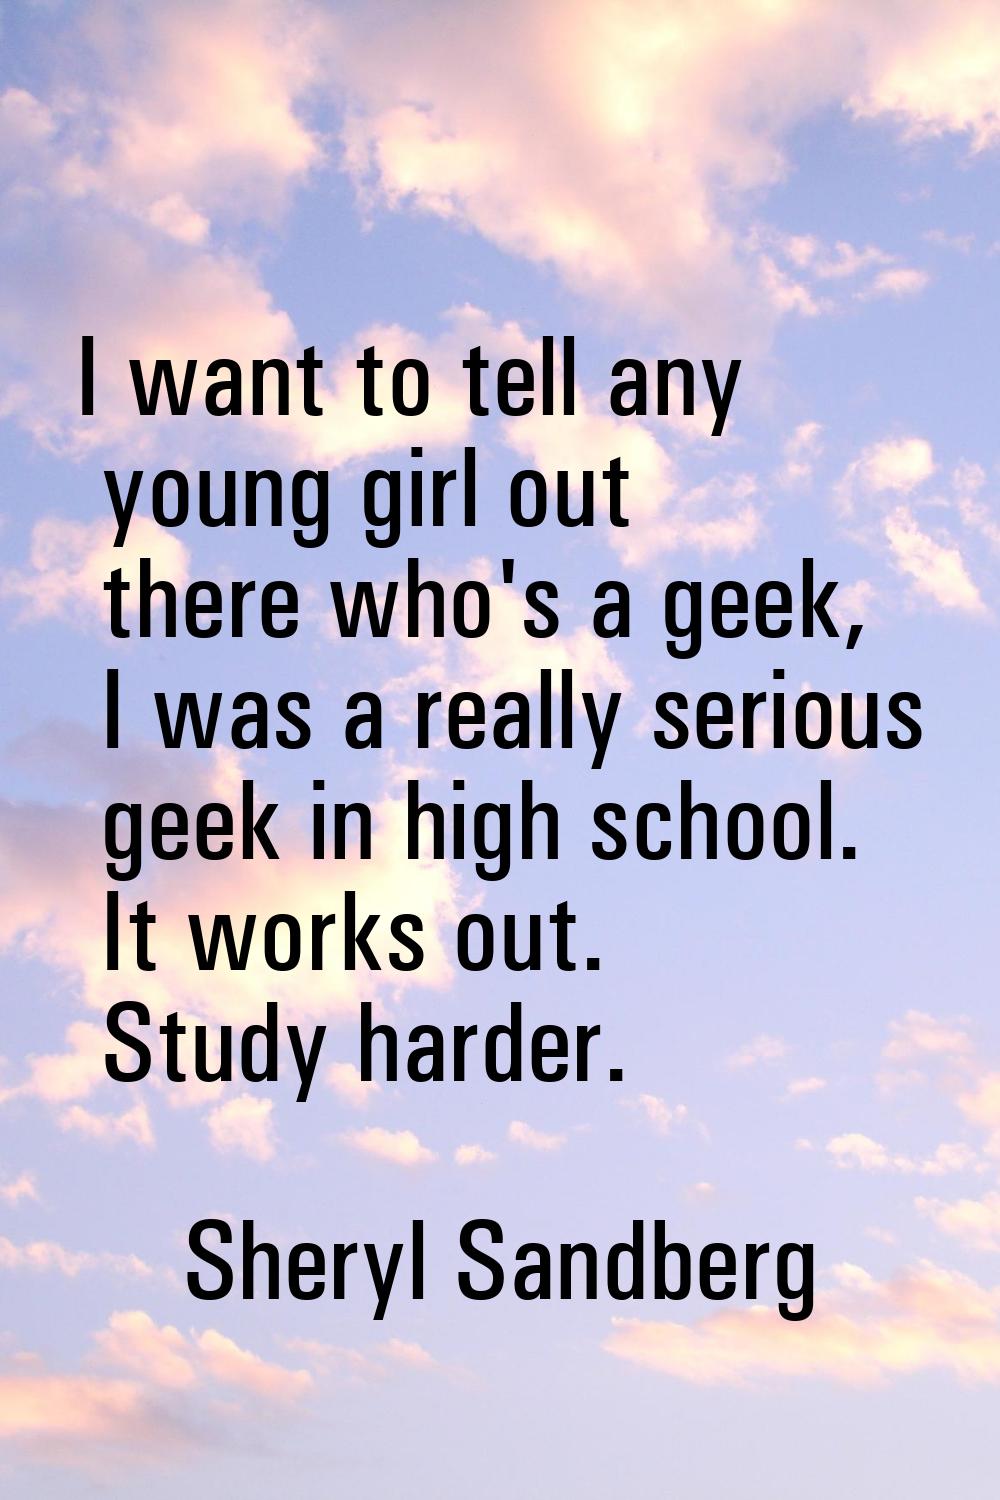 I want to tell any young girl out there who's a geek, I was a really serious geek in high school. I